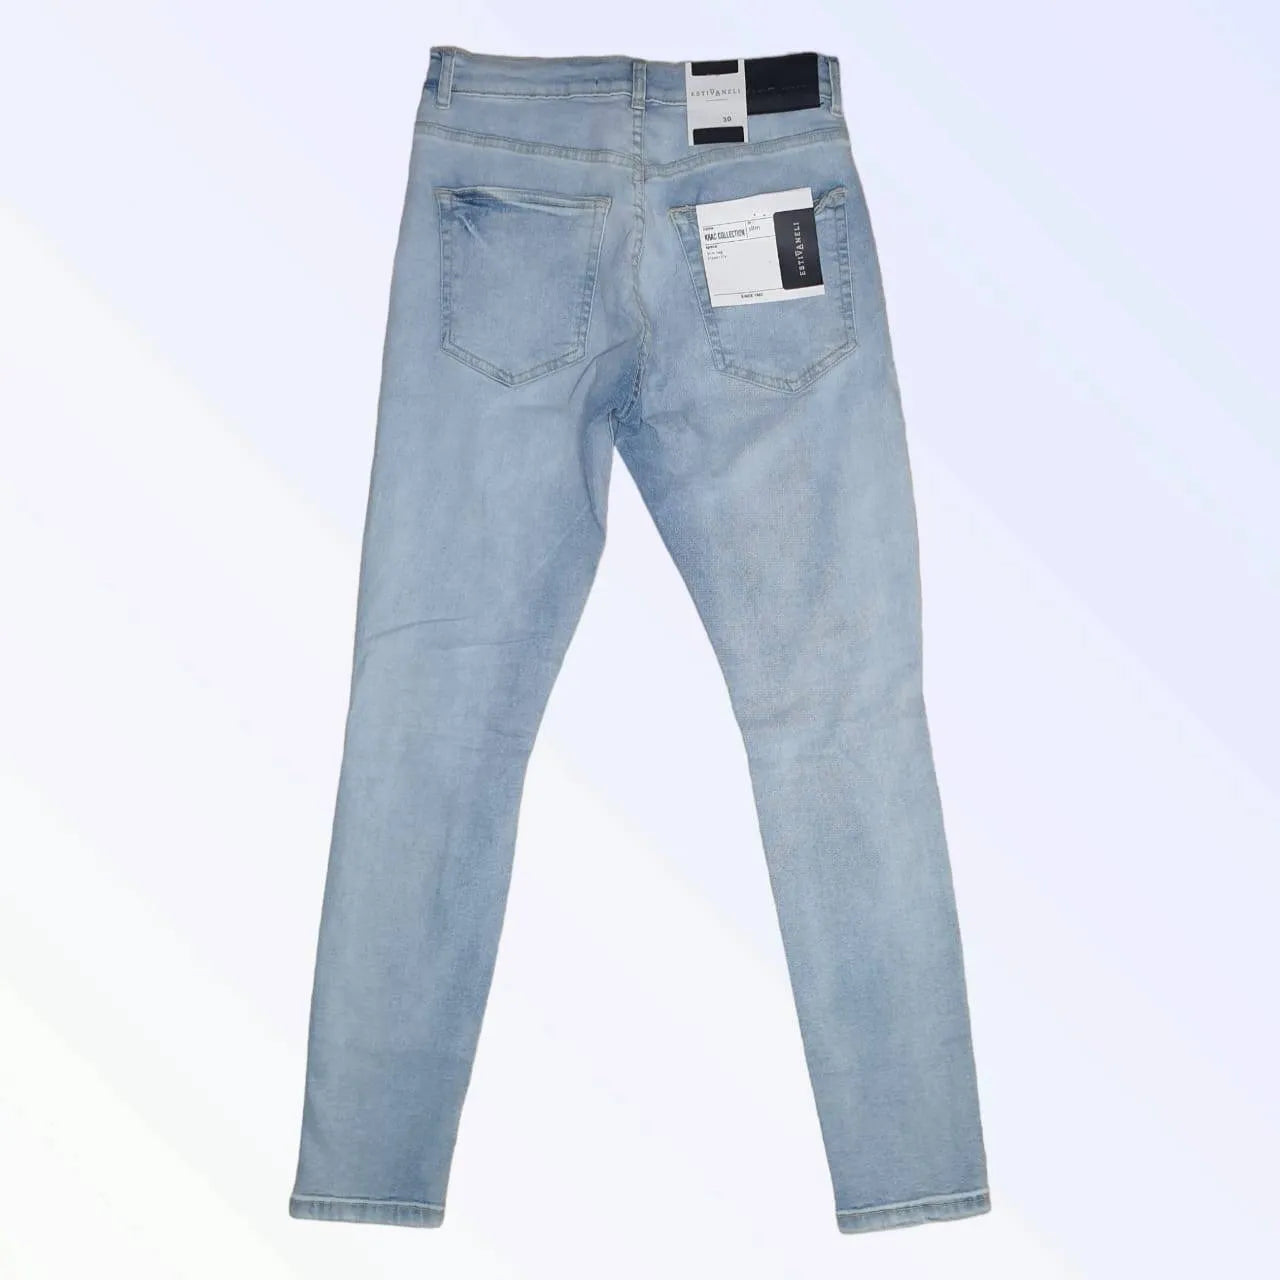 Estivaneli Ripped Jeans: Elevate your look with stylishly distressed denim (mention size if relevant).Express your individuality with unique rips and distressed details.Estivaneli, distressed denim, stylish, edgy, comfortable, statement piece.